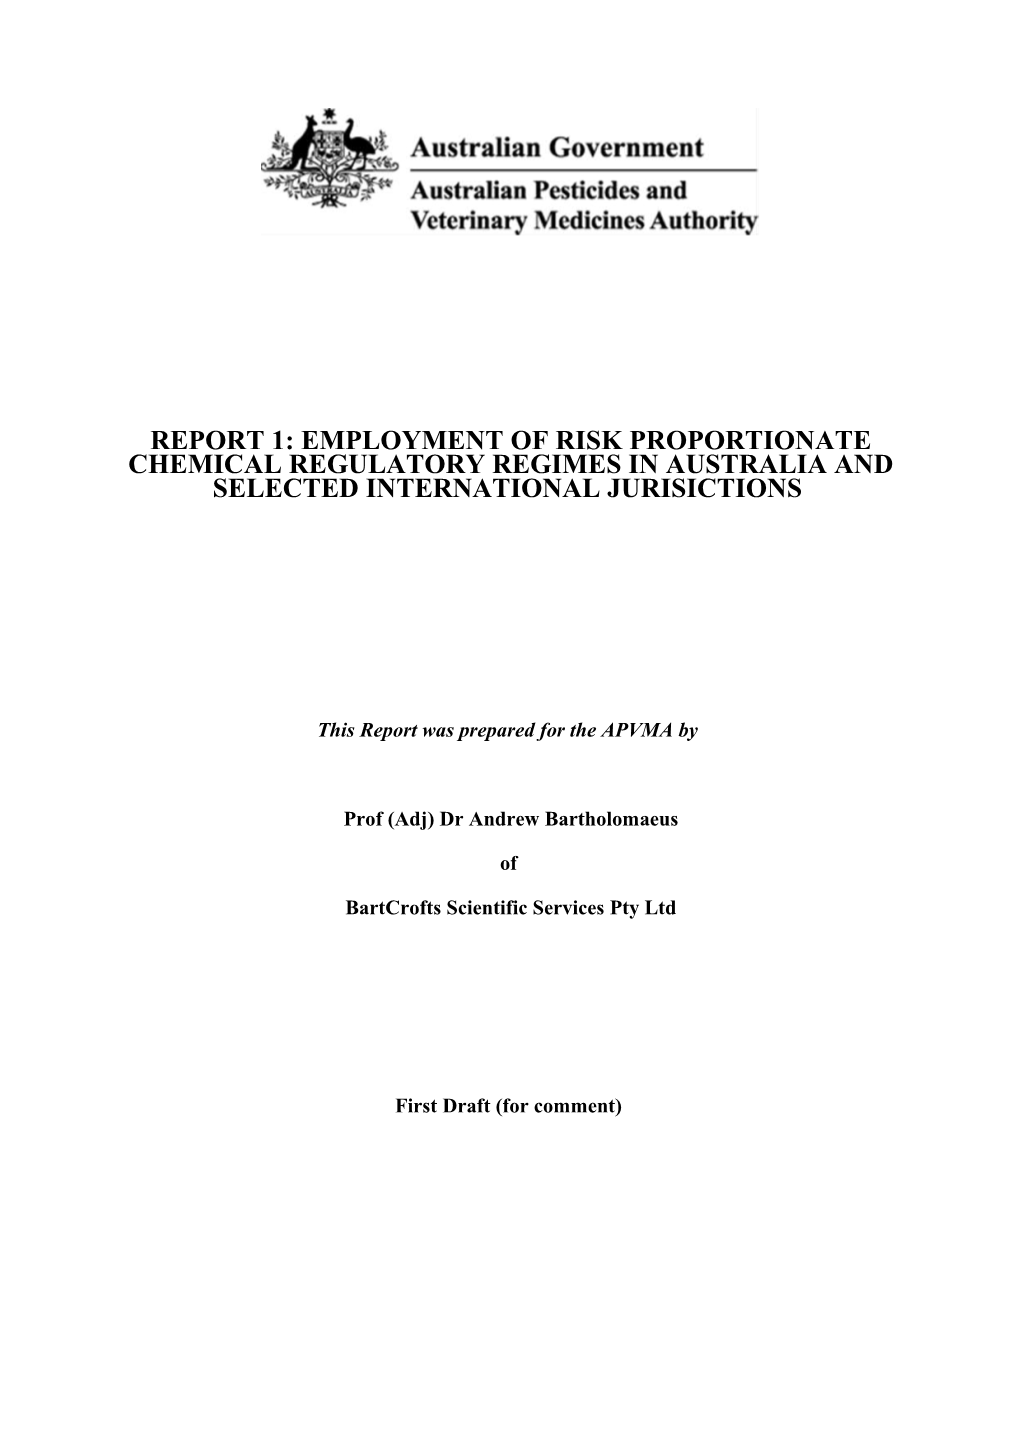 Report 1: Employment of Risk Proportionate Chemical Regulatory Regimes in Australia And